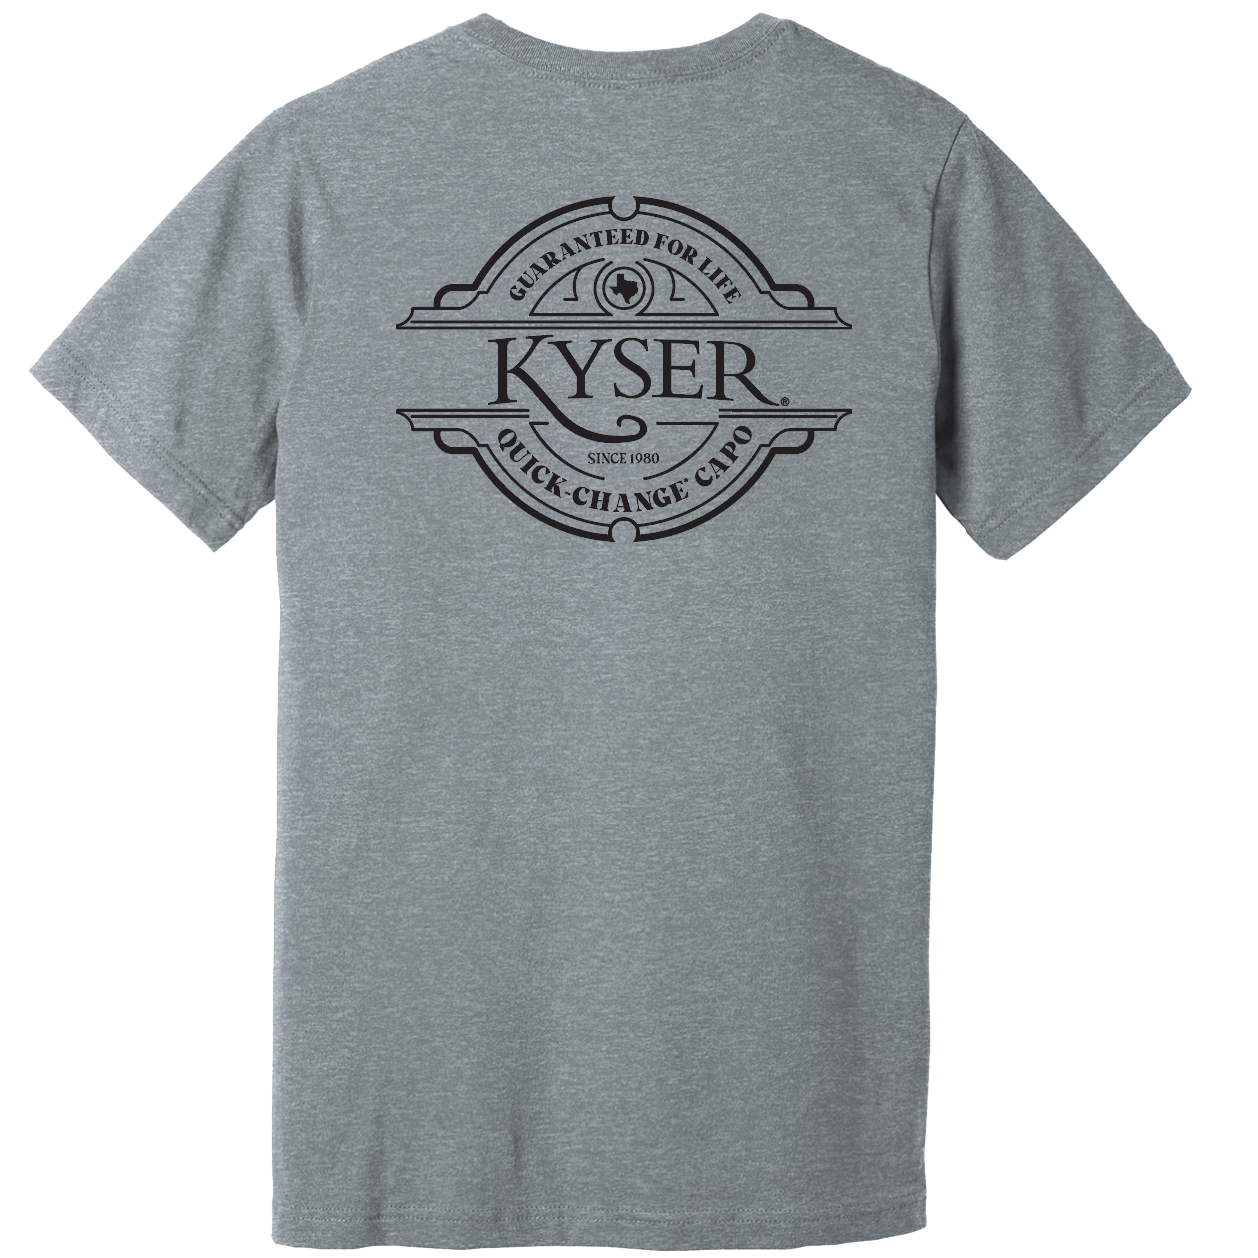 "World's Most Trusted" Logo T-Shirt - Gray